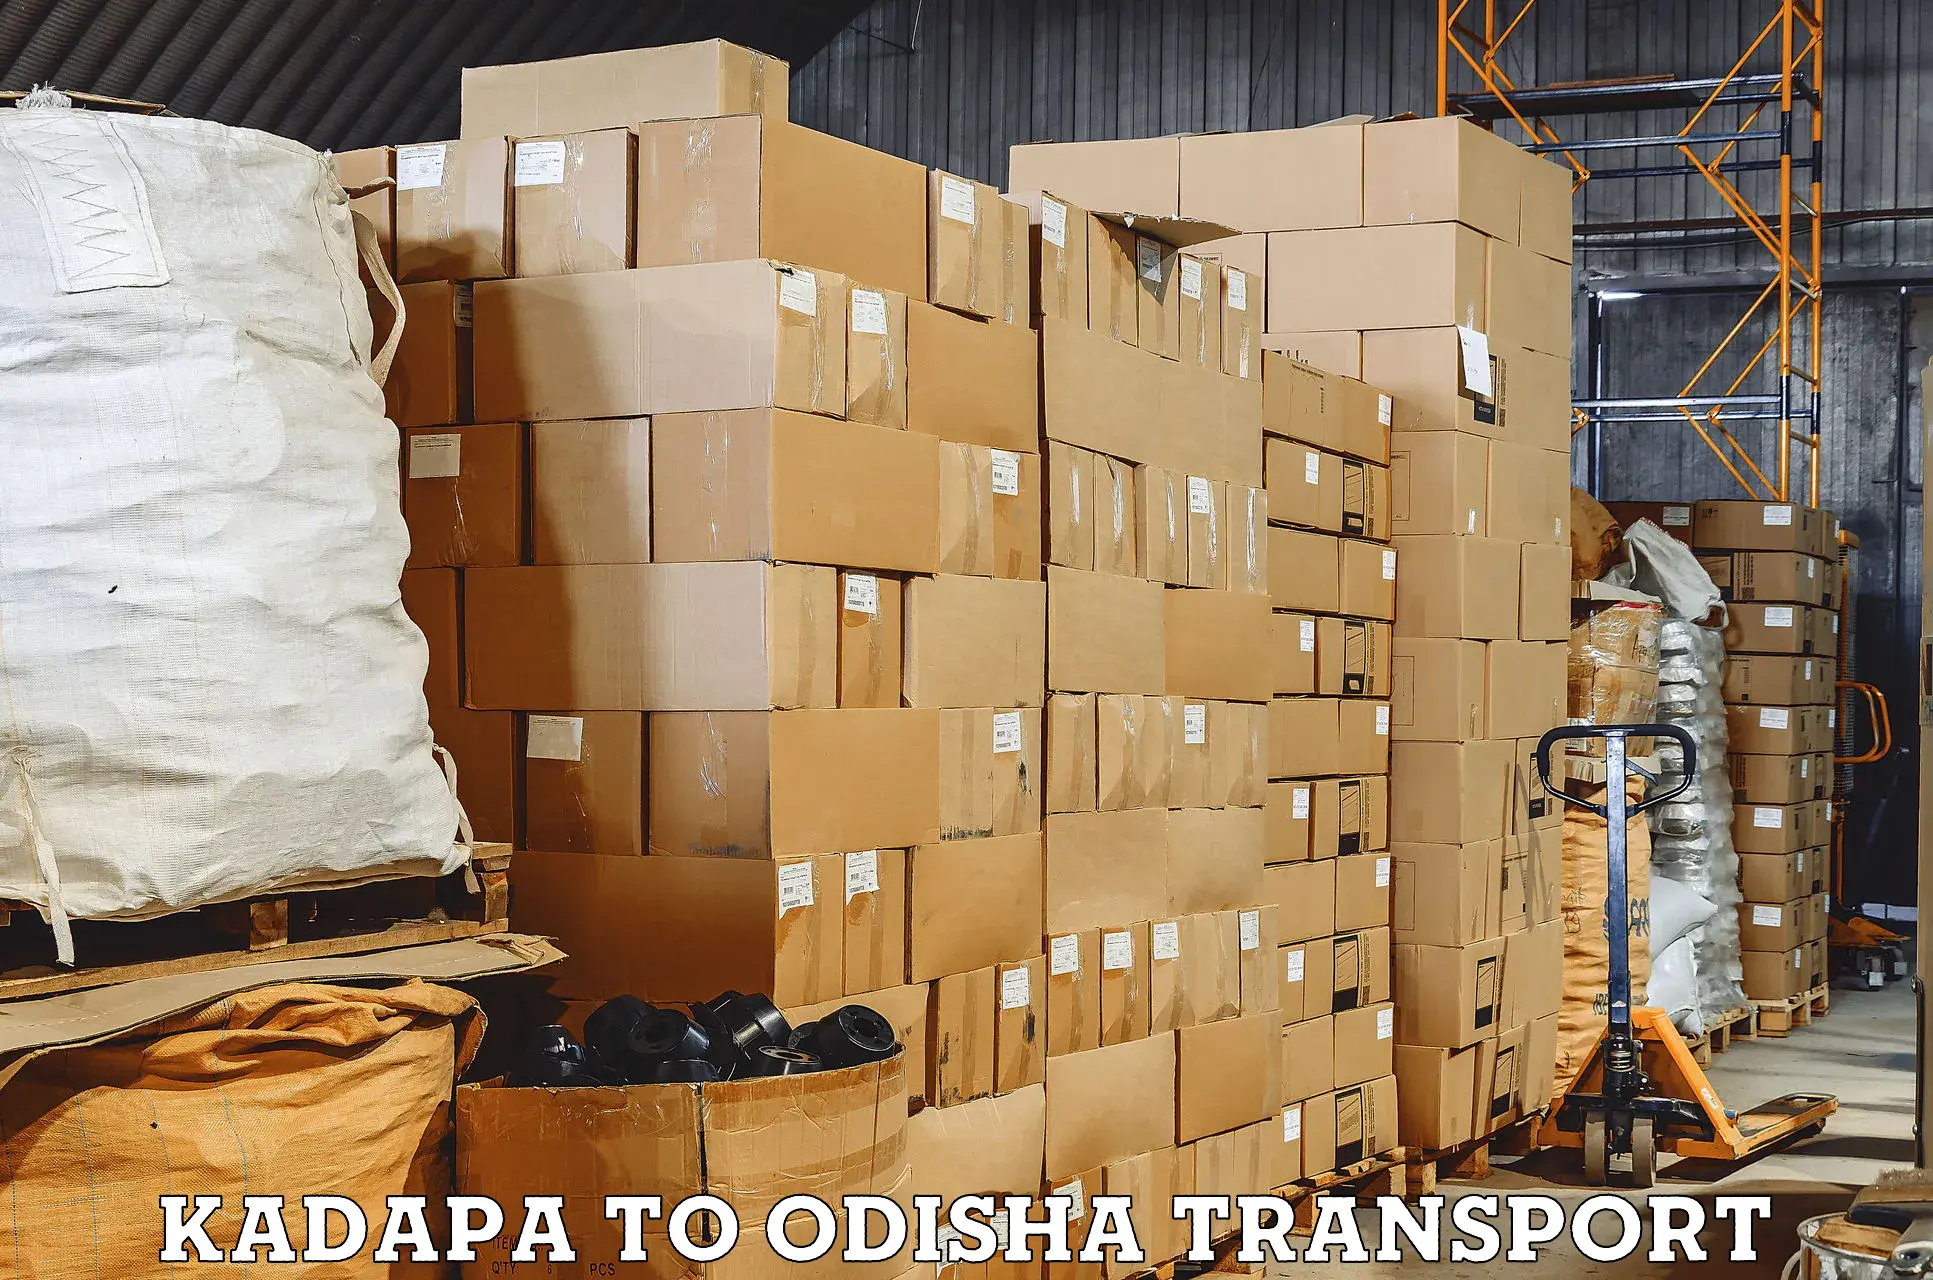 Transport bike from one state to another Kadapa to Chandipur